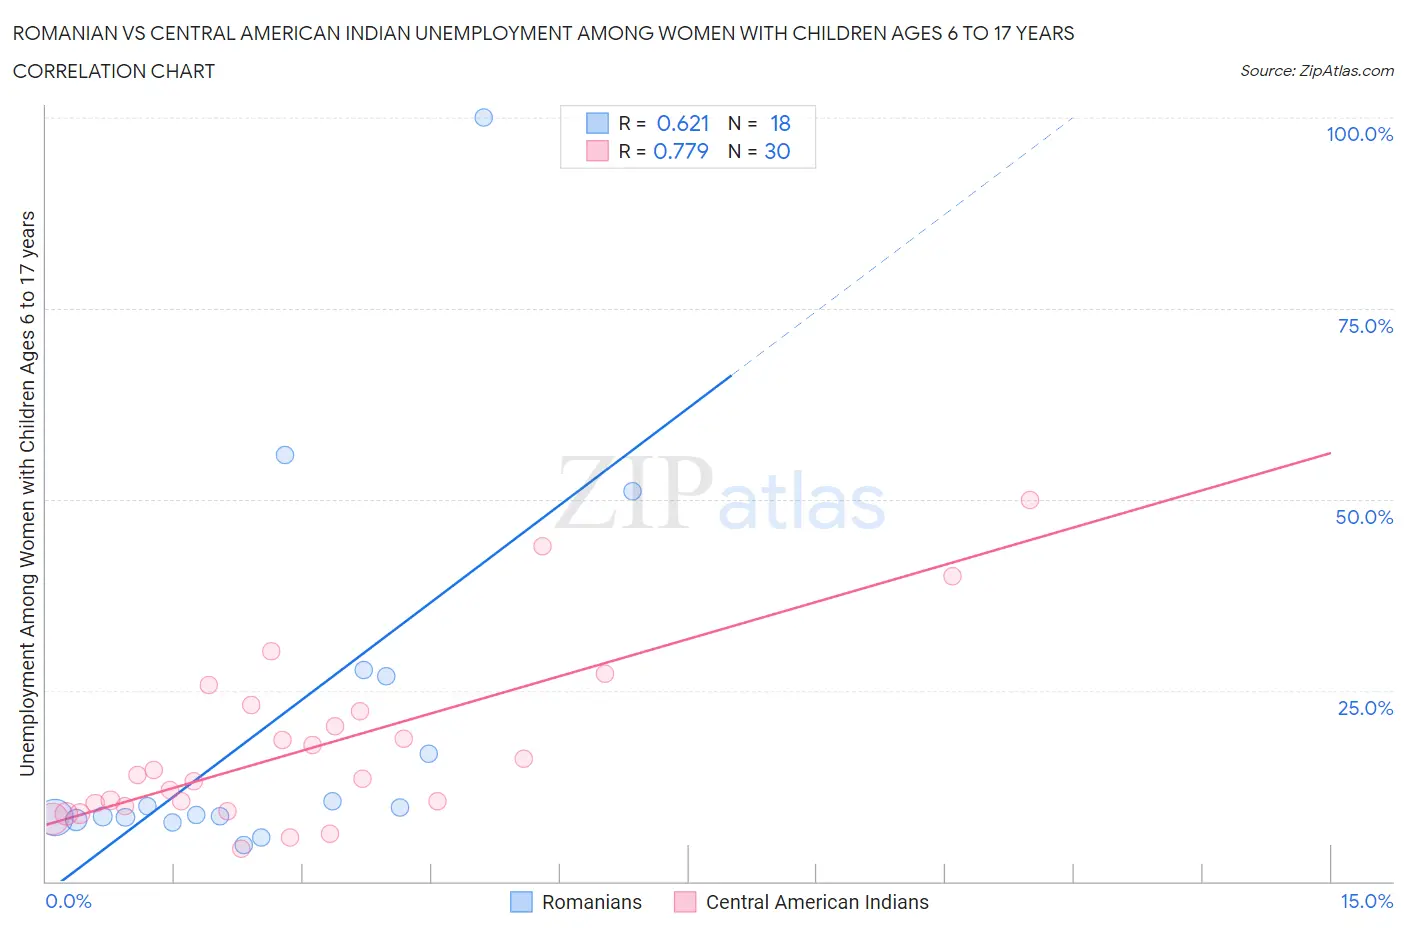 Romanian vs Central American Indian Unemployment Among Women with Children Ages 6 to 17 years